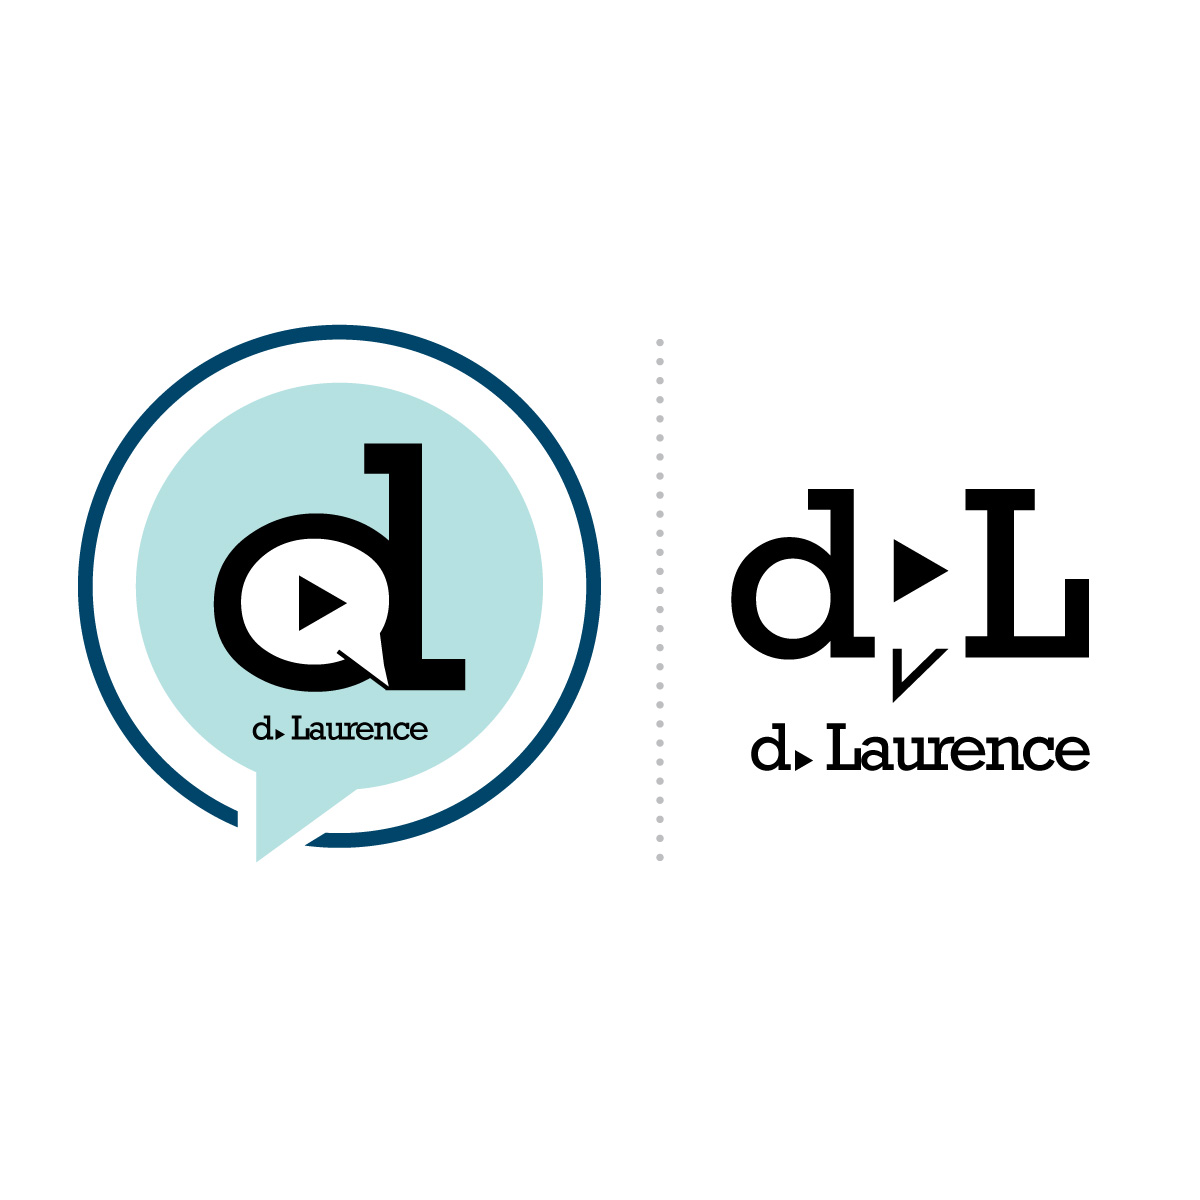 dovina laurence primary logo and secondary logo